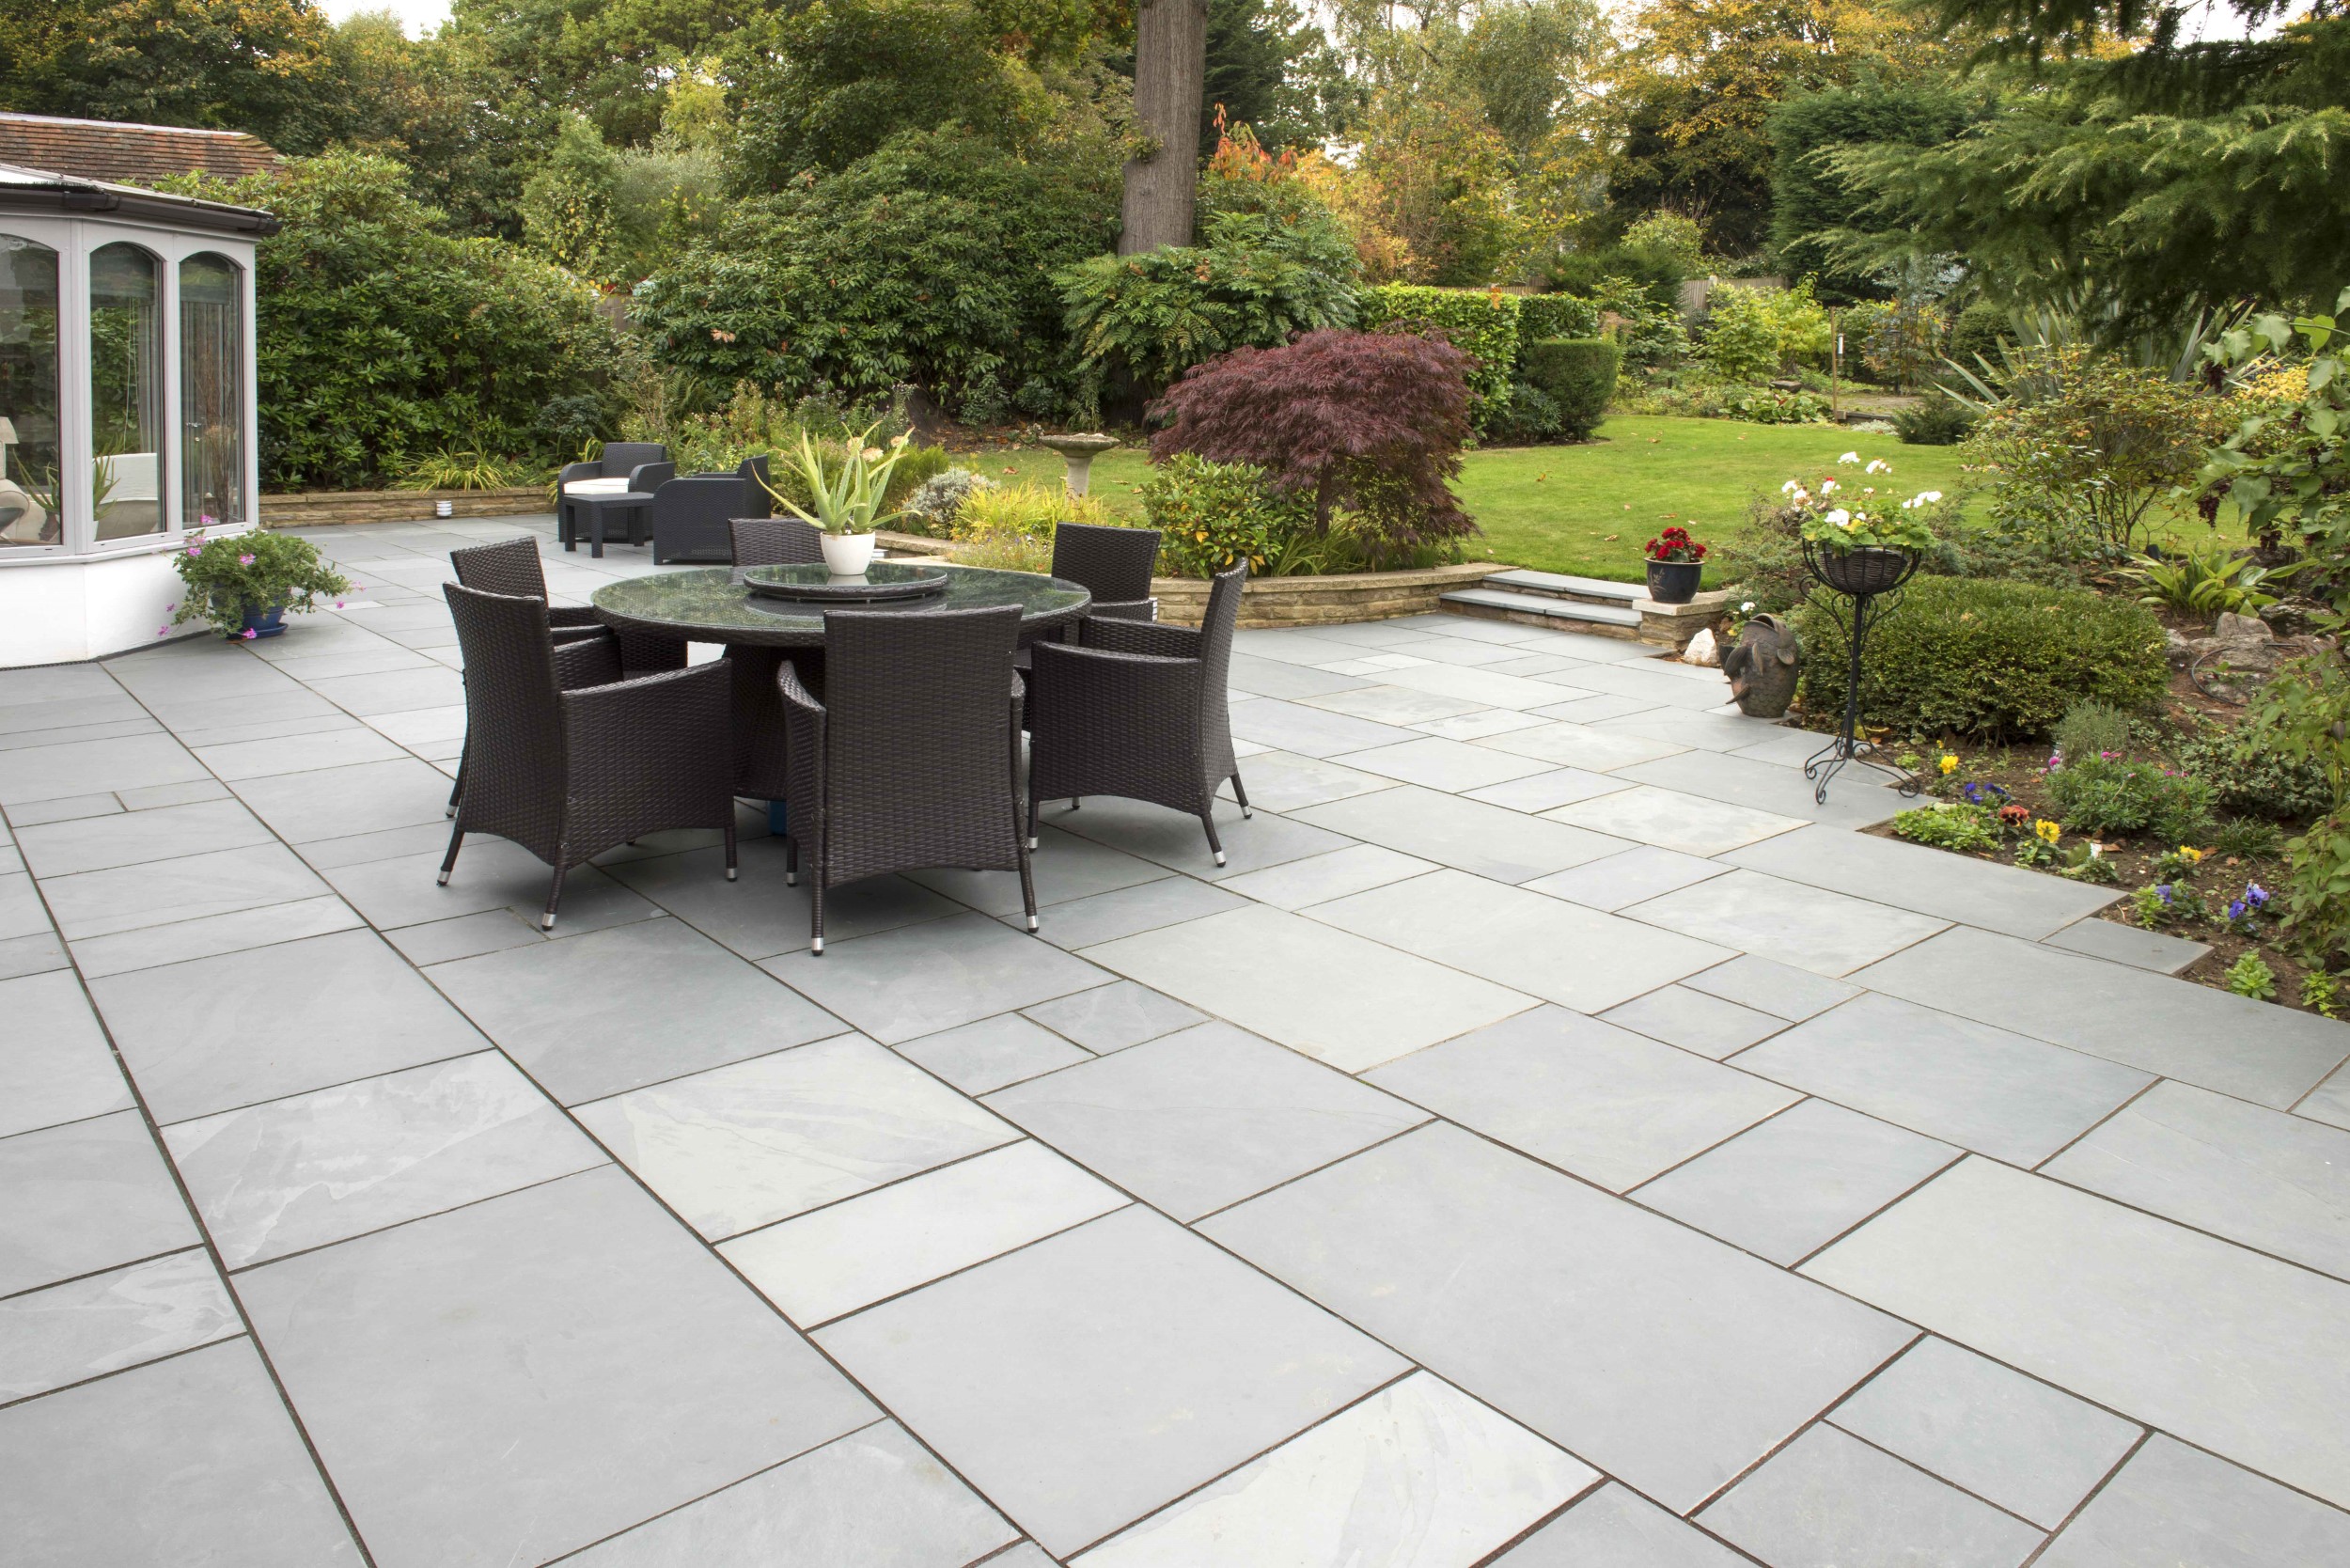 Riven Slate, Woodland Grey natural stone indian stone paving indian sandstone